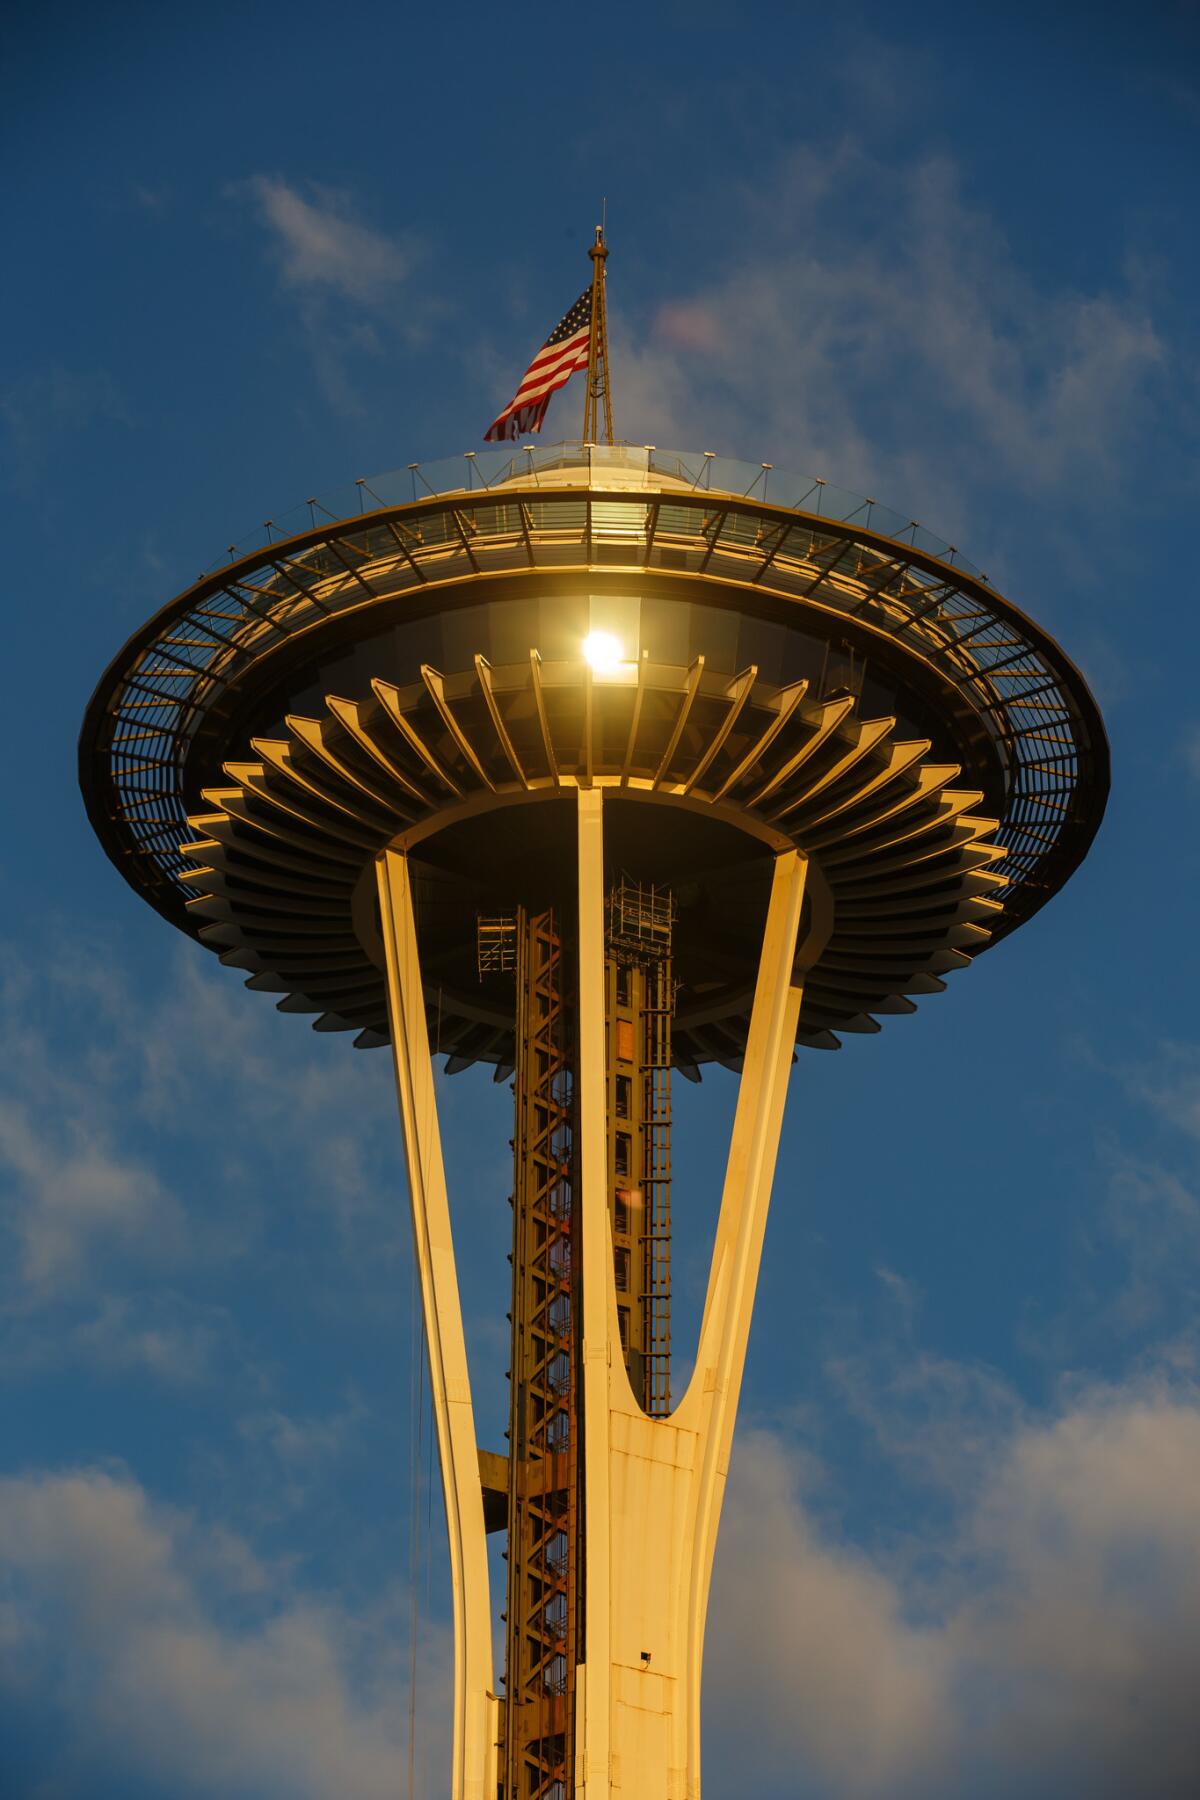 Sunrise bathes the Space Needle in a warm glow, in Seattle, Wash.